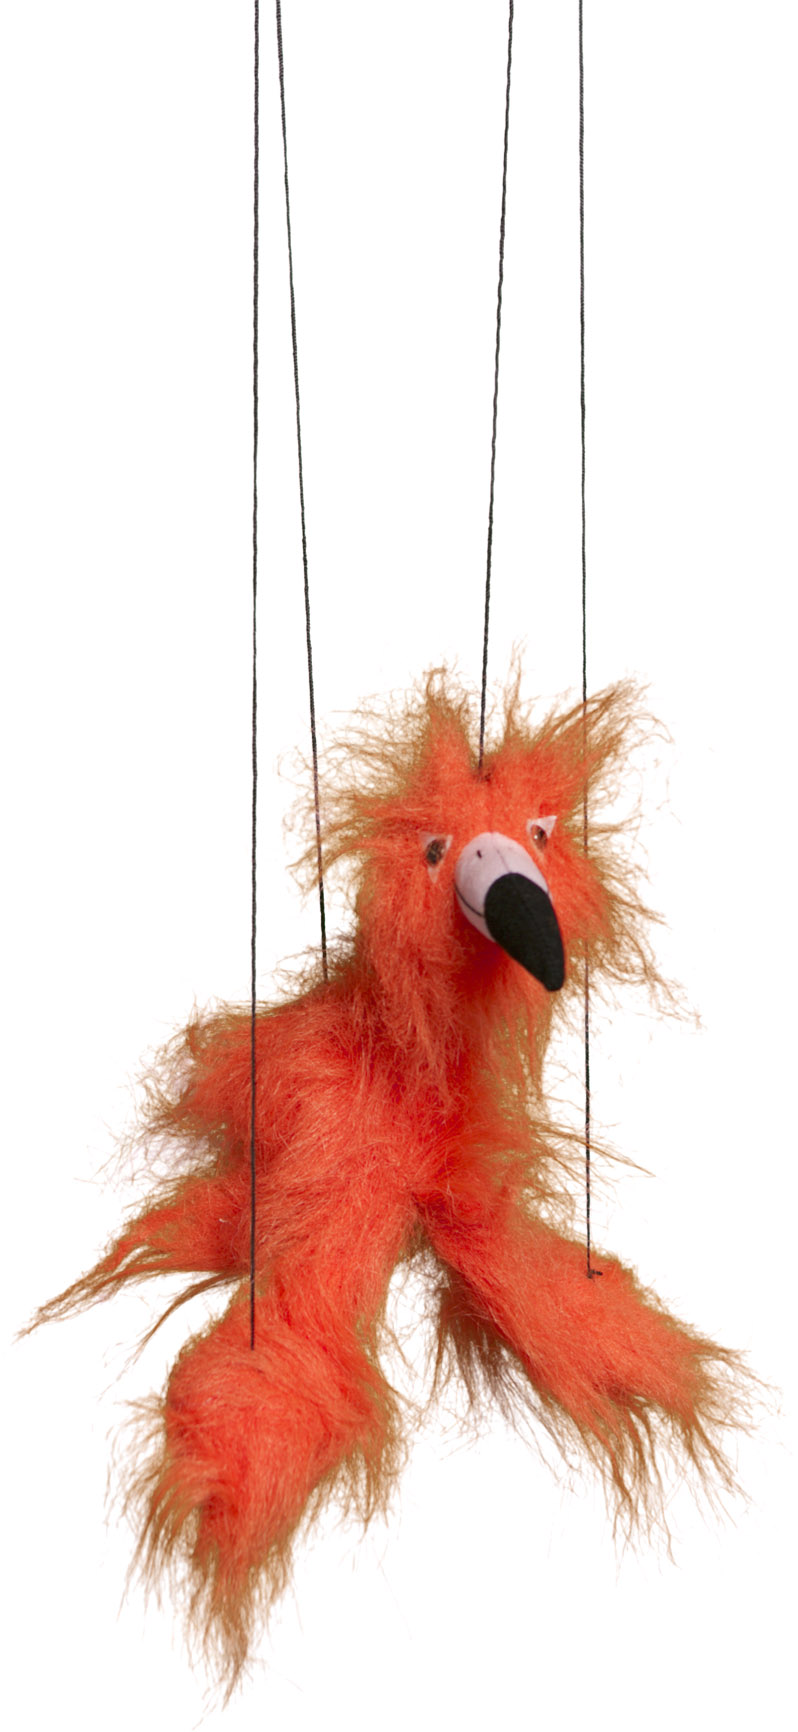 Picture of Sunny Toys WB322 16 In. Baby Flamingo - Orange-Red- Marionette Puppet